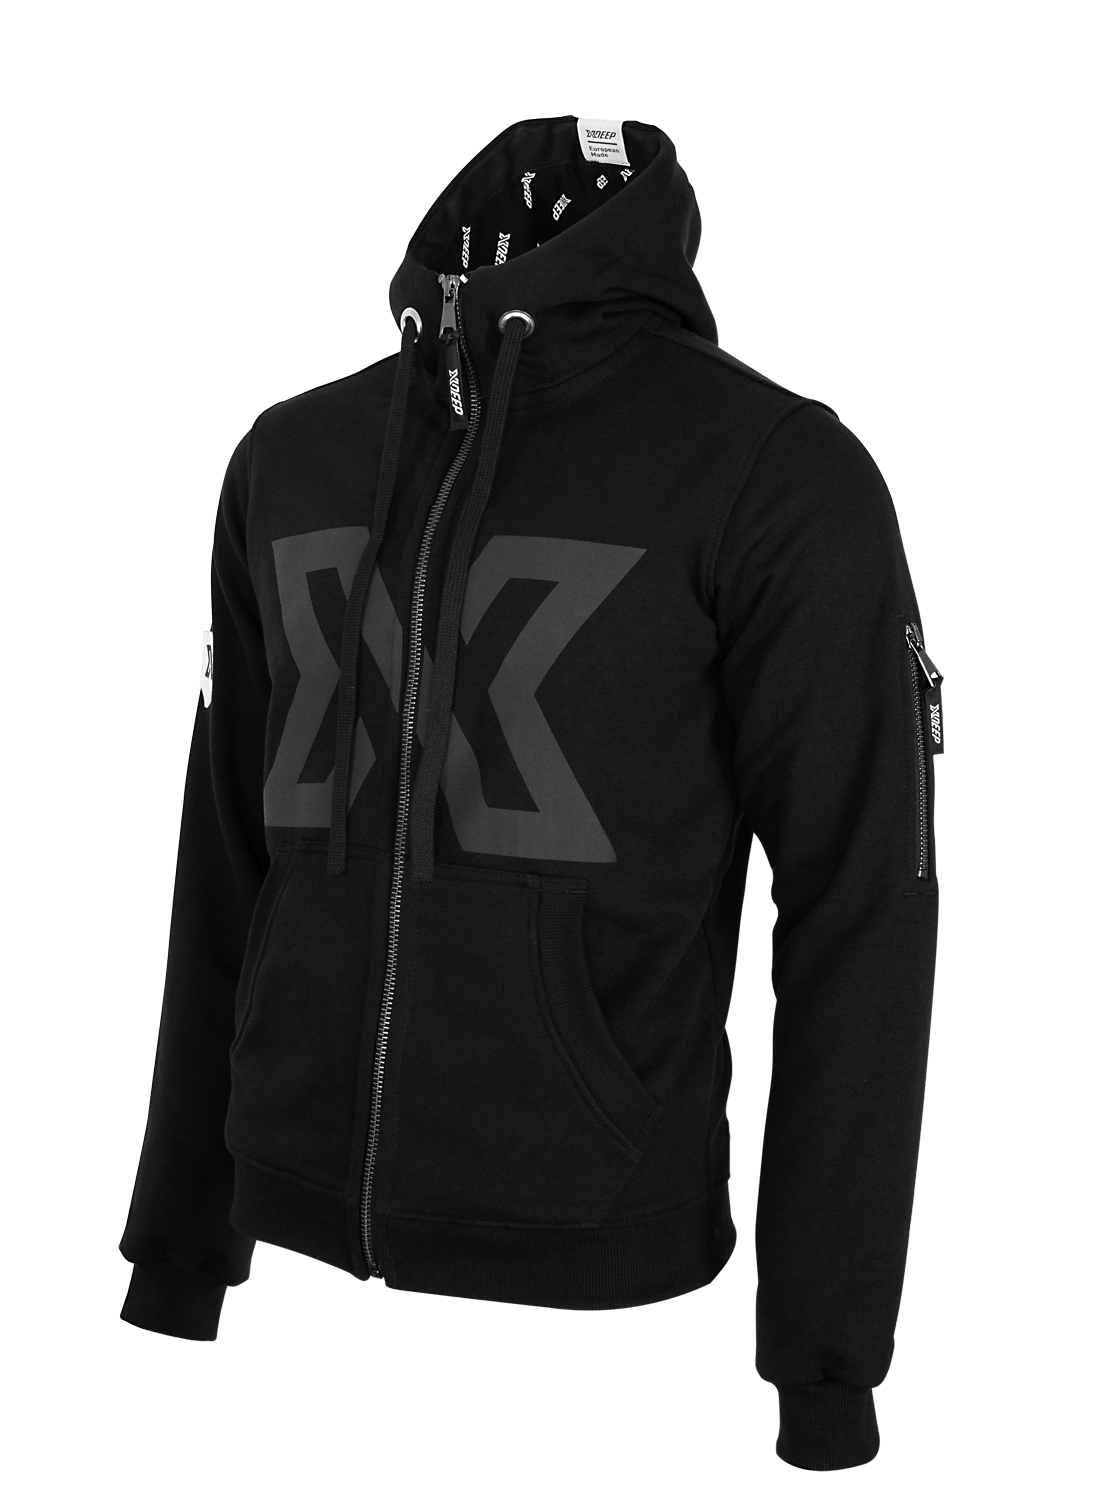 XDEEP XDEEP Signature Hoodie - Black Small - Oyster Diving